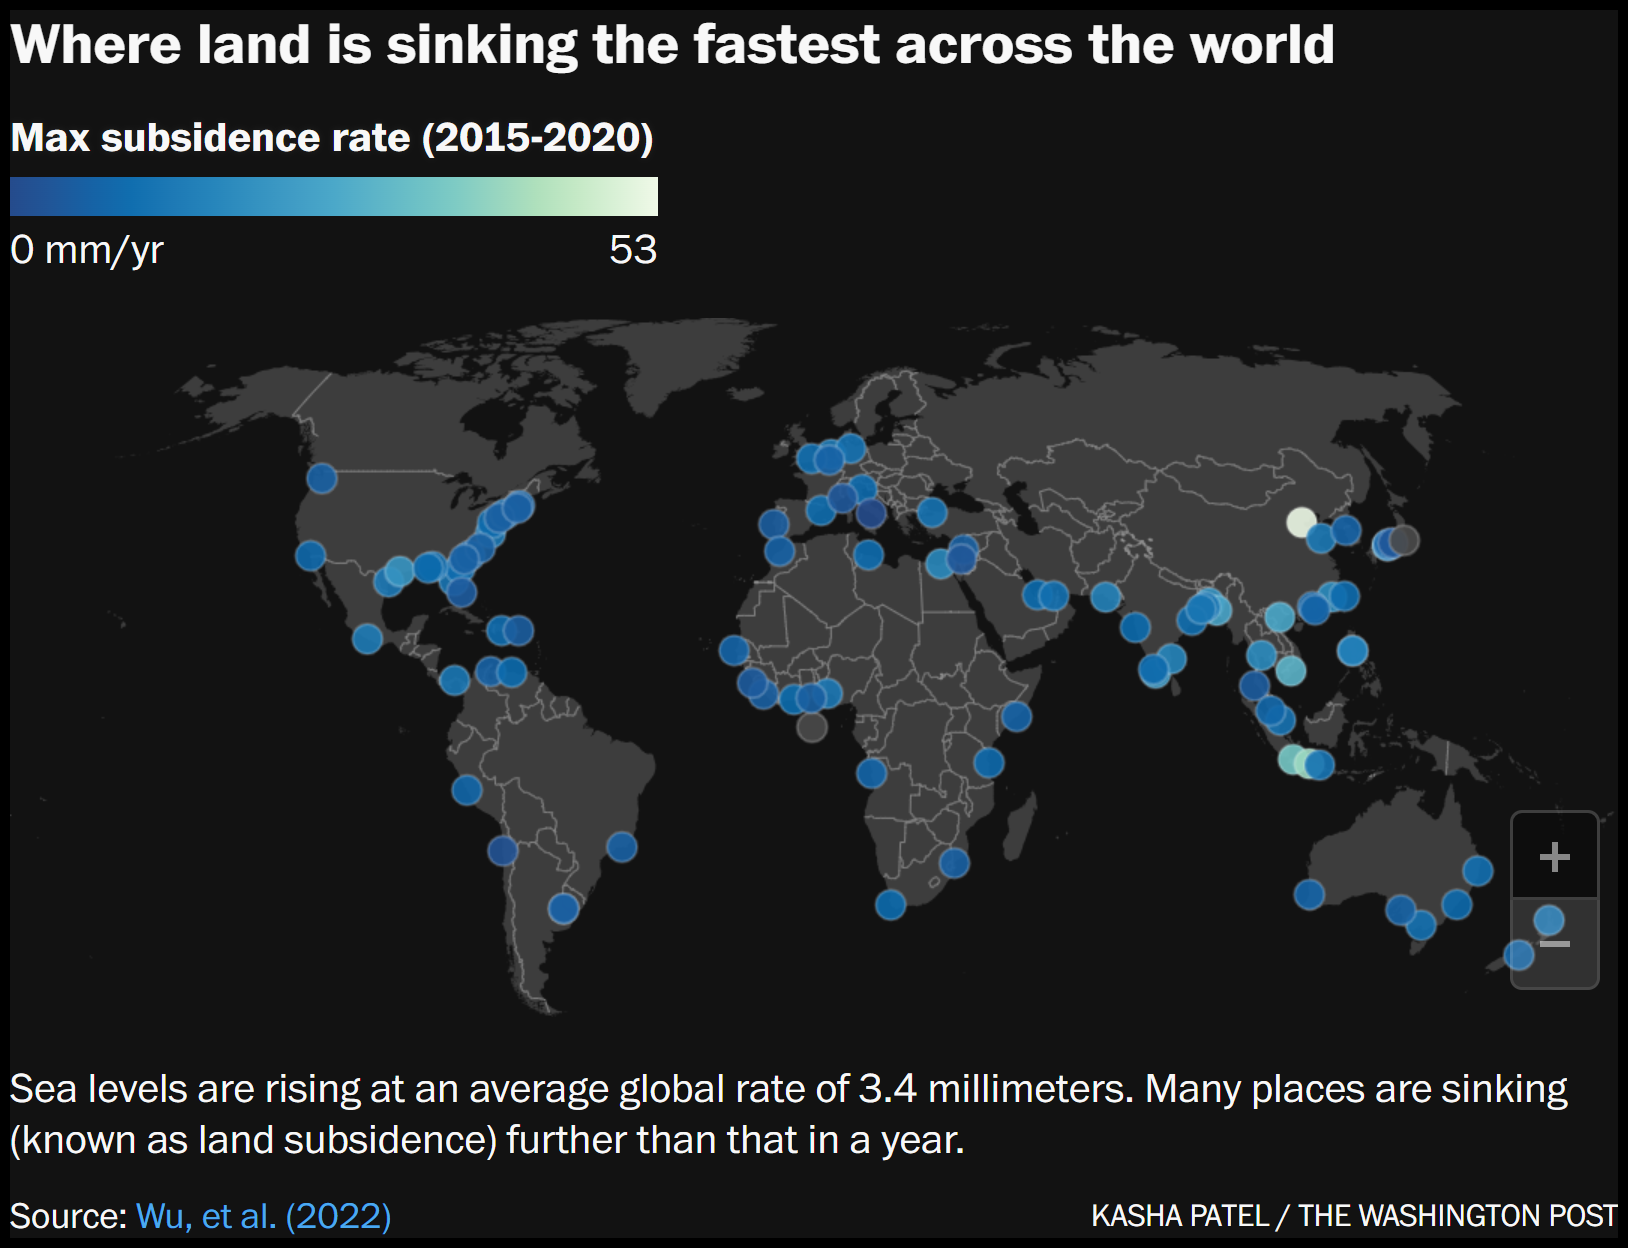 Map showing maximum land subsidence rates around the world, 2015-2020. Sea levels are rising at an average global rate of 3.4 millimeters. Many places are sinking (known as land subsidence) further than that in a year. Data: Wu, et al., 2022. Graphic: Kasha Patel / The Washington Post